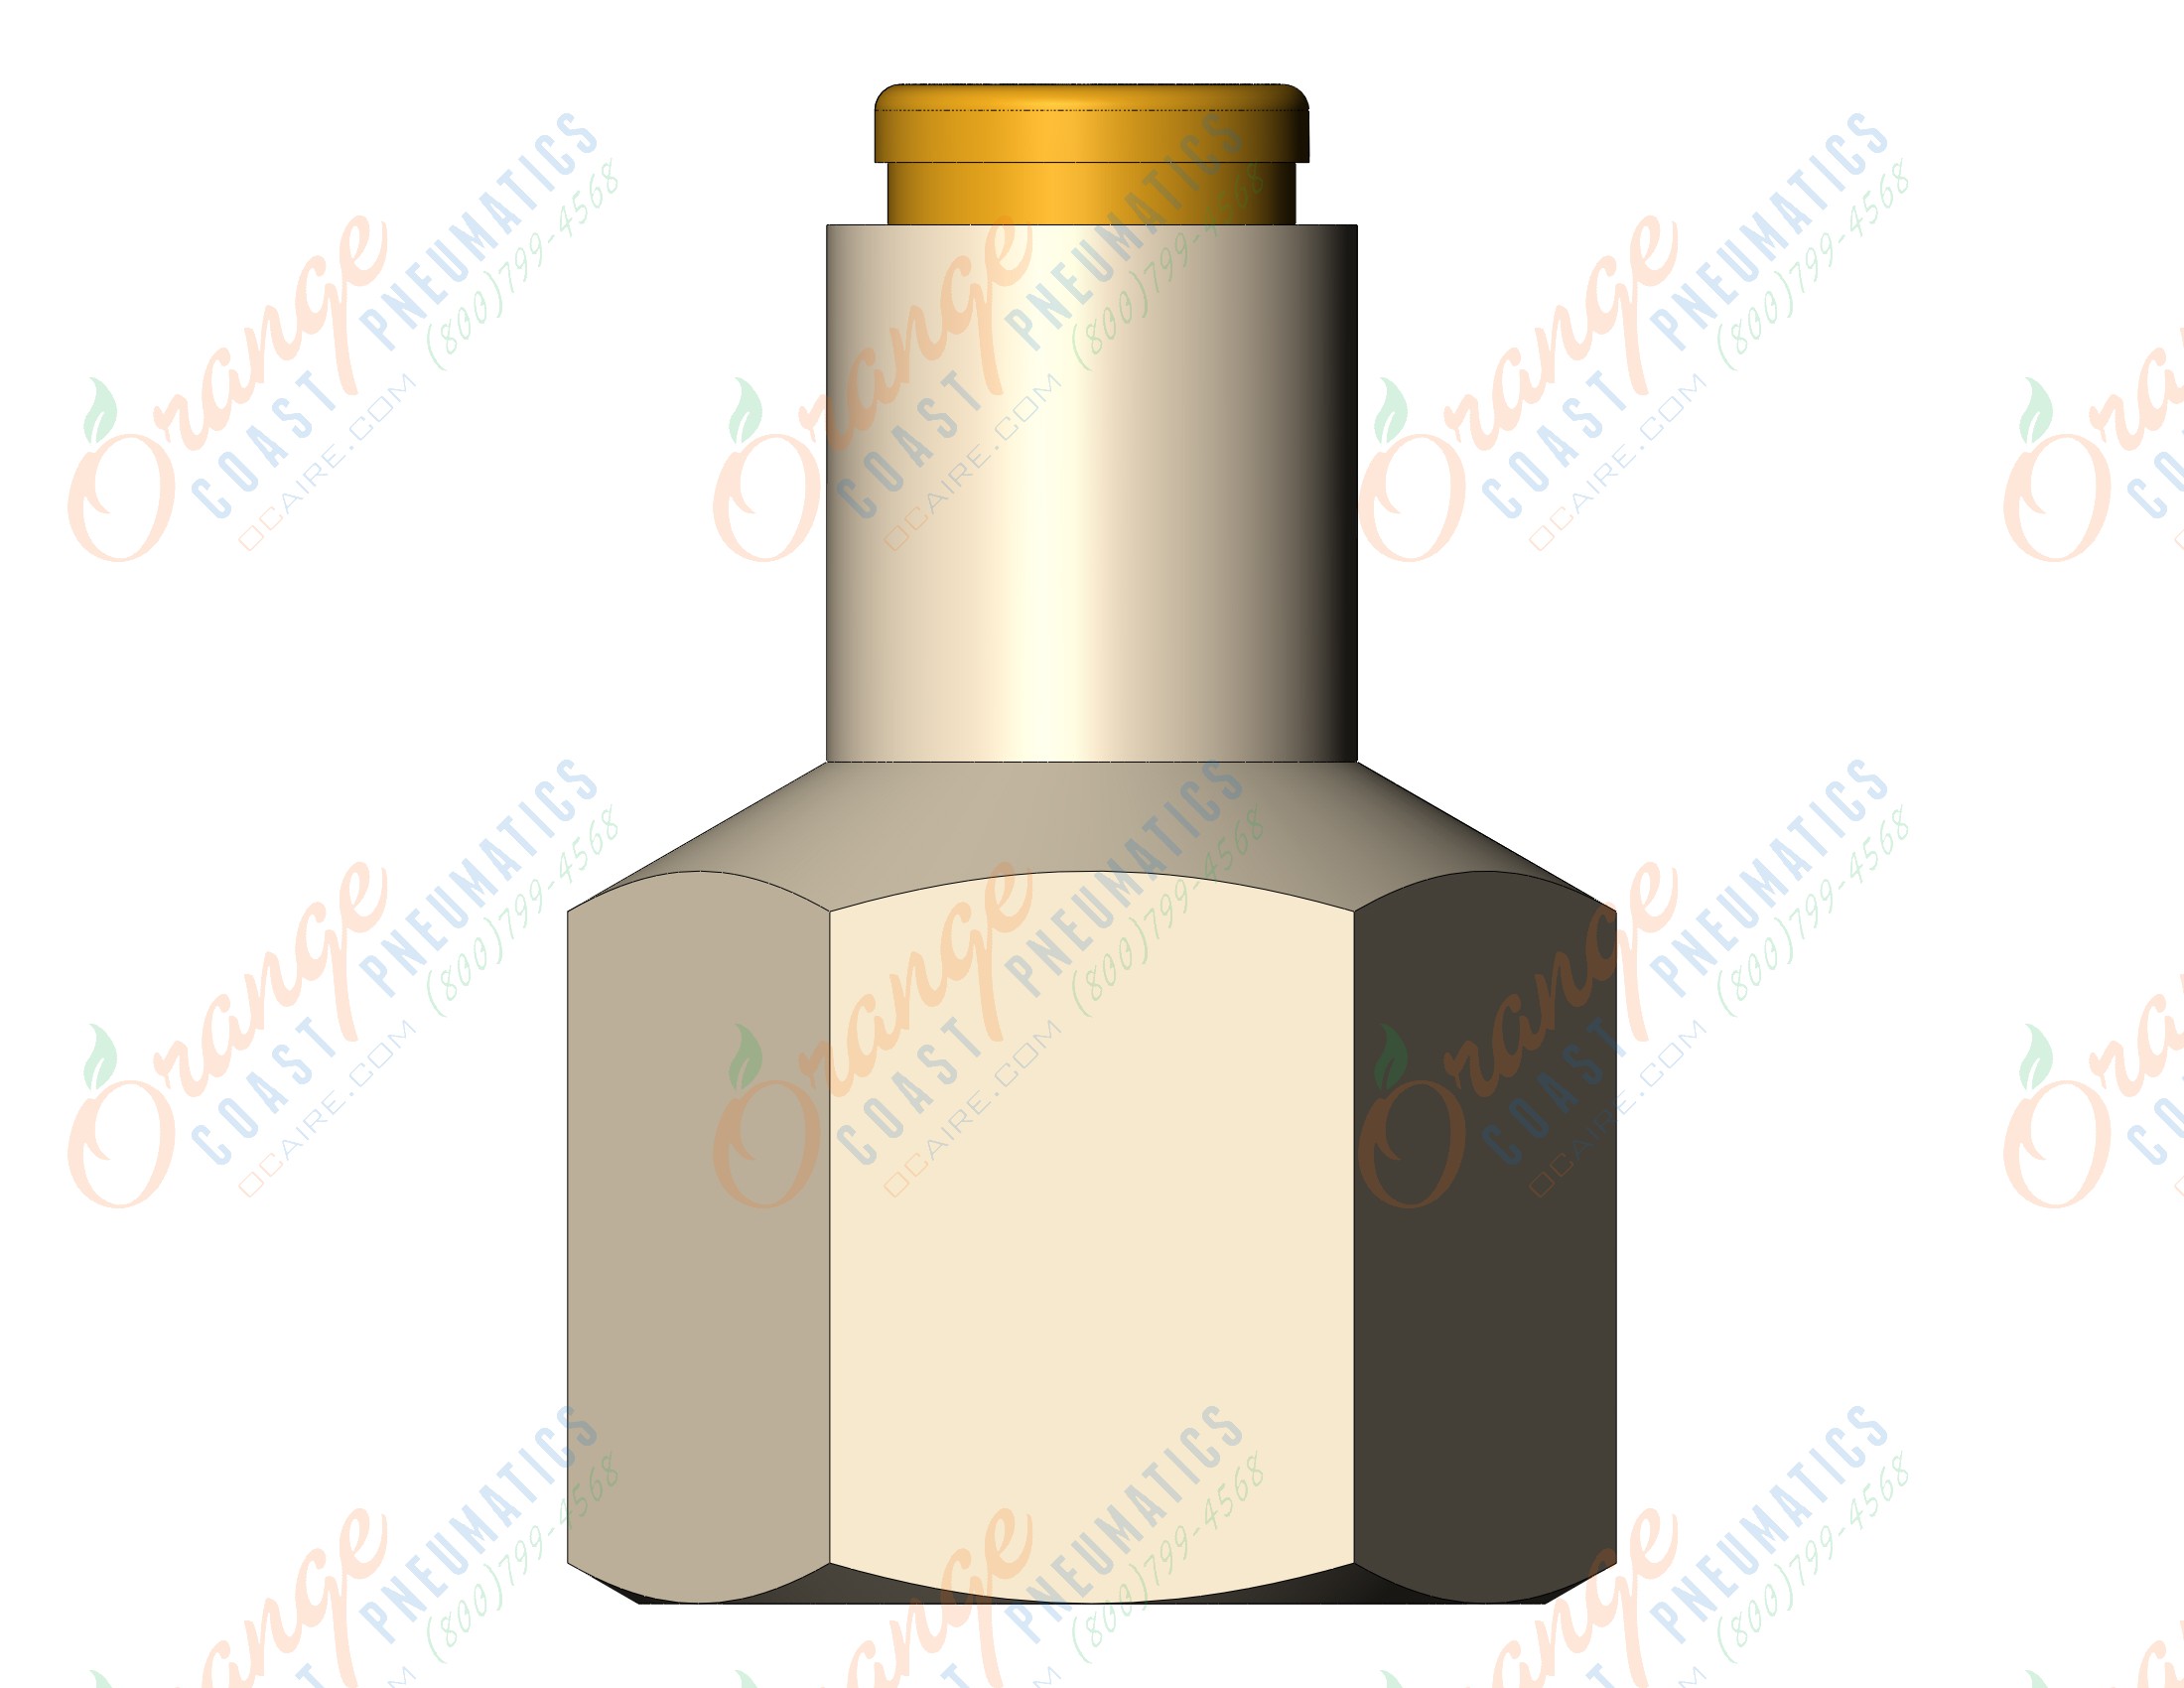 SMC KQ2F07-35A kq2 1/4, KQ2 FITTING (sold in packages of 10; price is per piece)